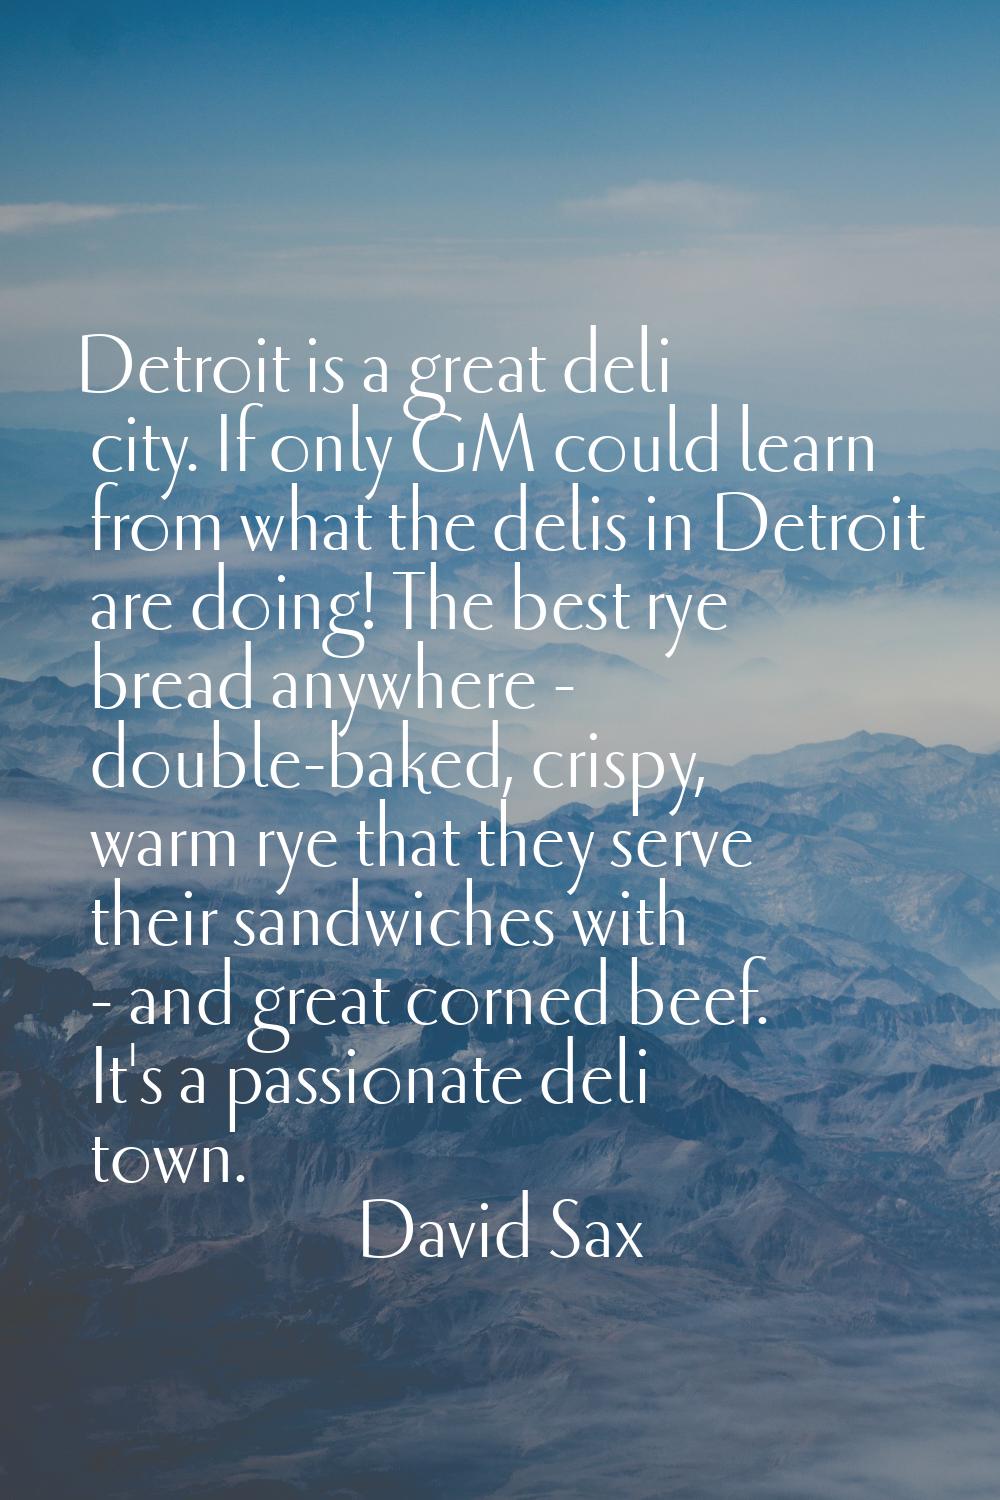 Detroit is a great deli city. If only GM could learn from what the delis in Detroit are doing! The 